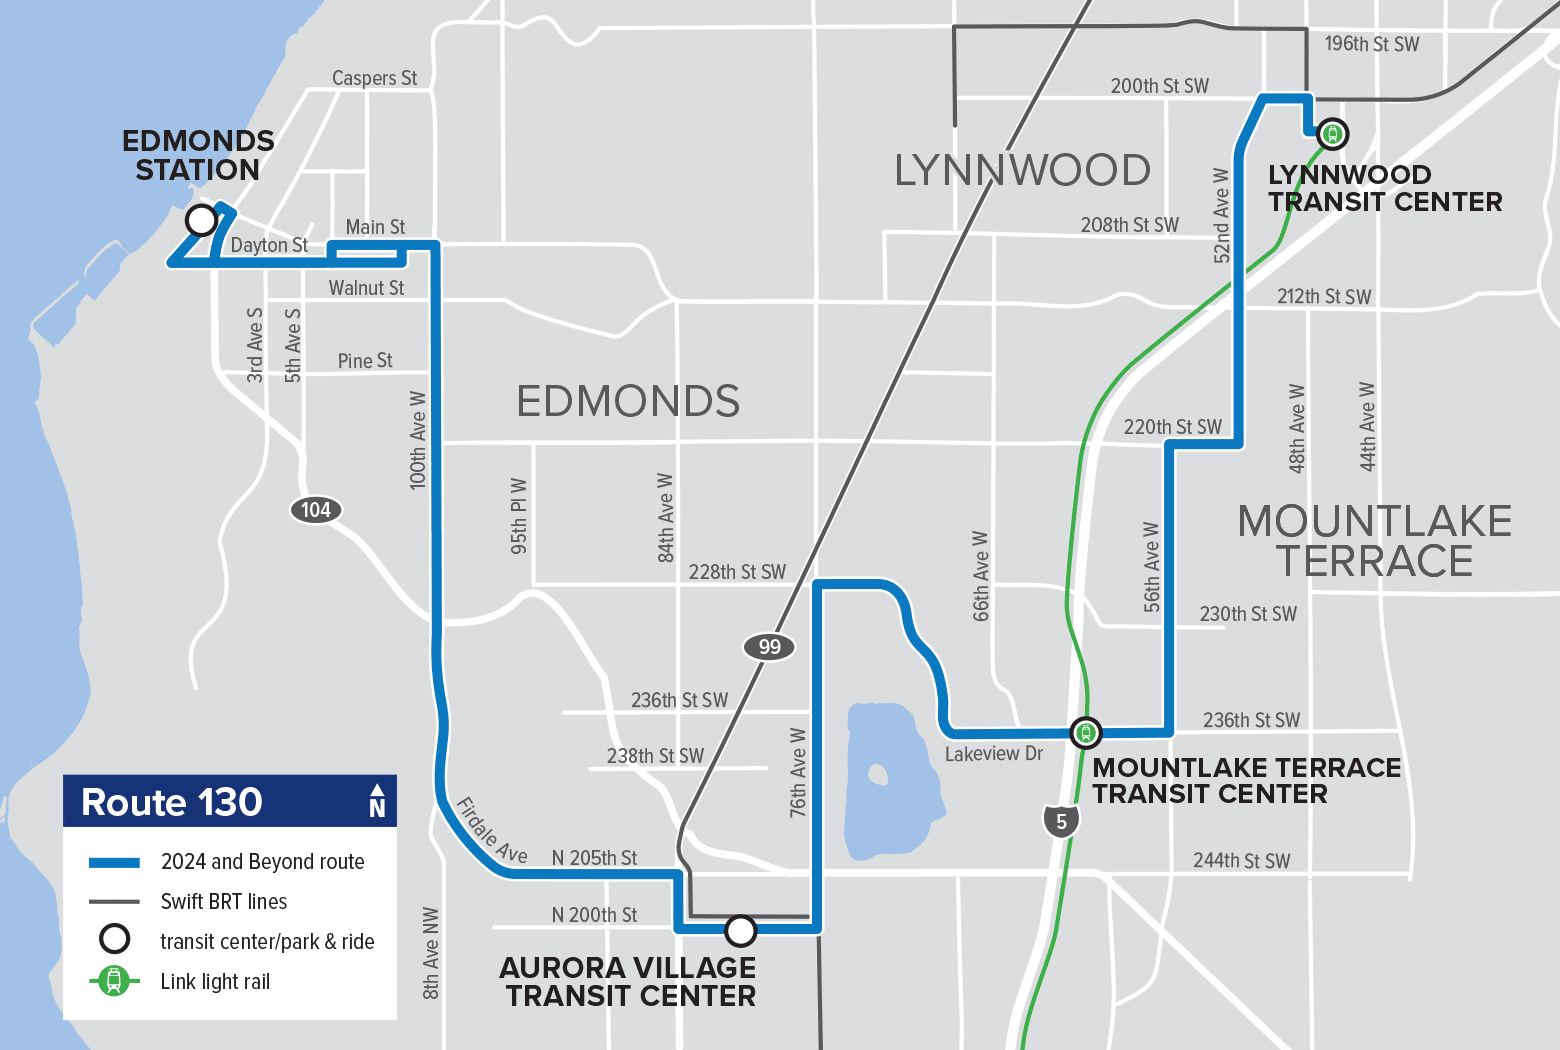 Route 130: Edmonds – Lynnwood (revised route)